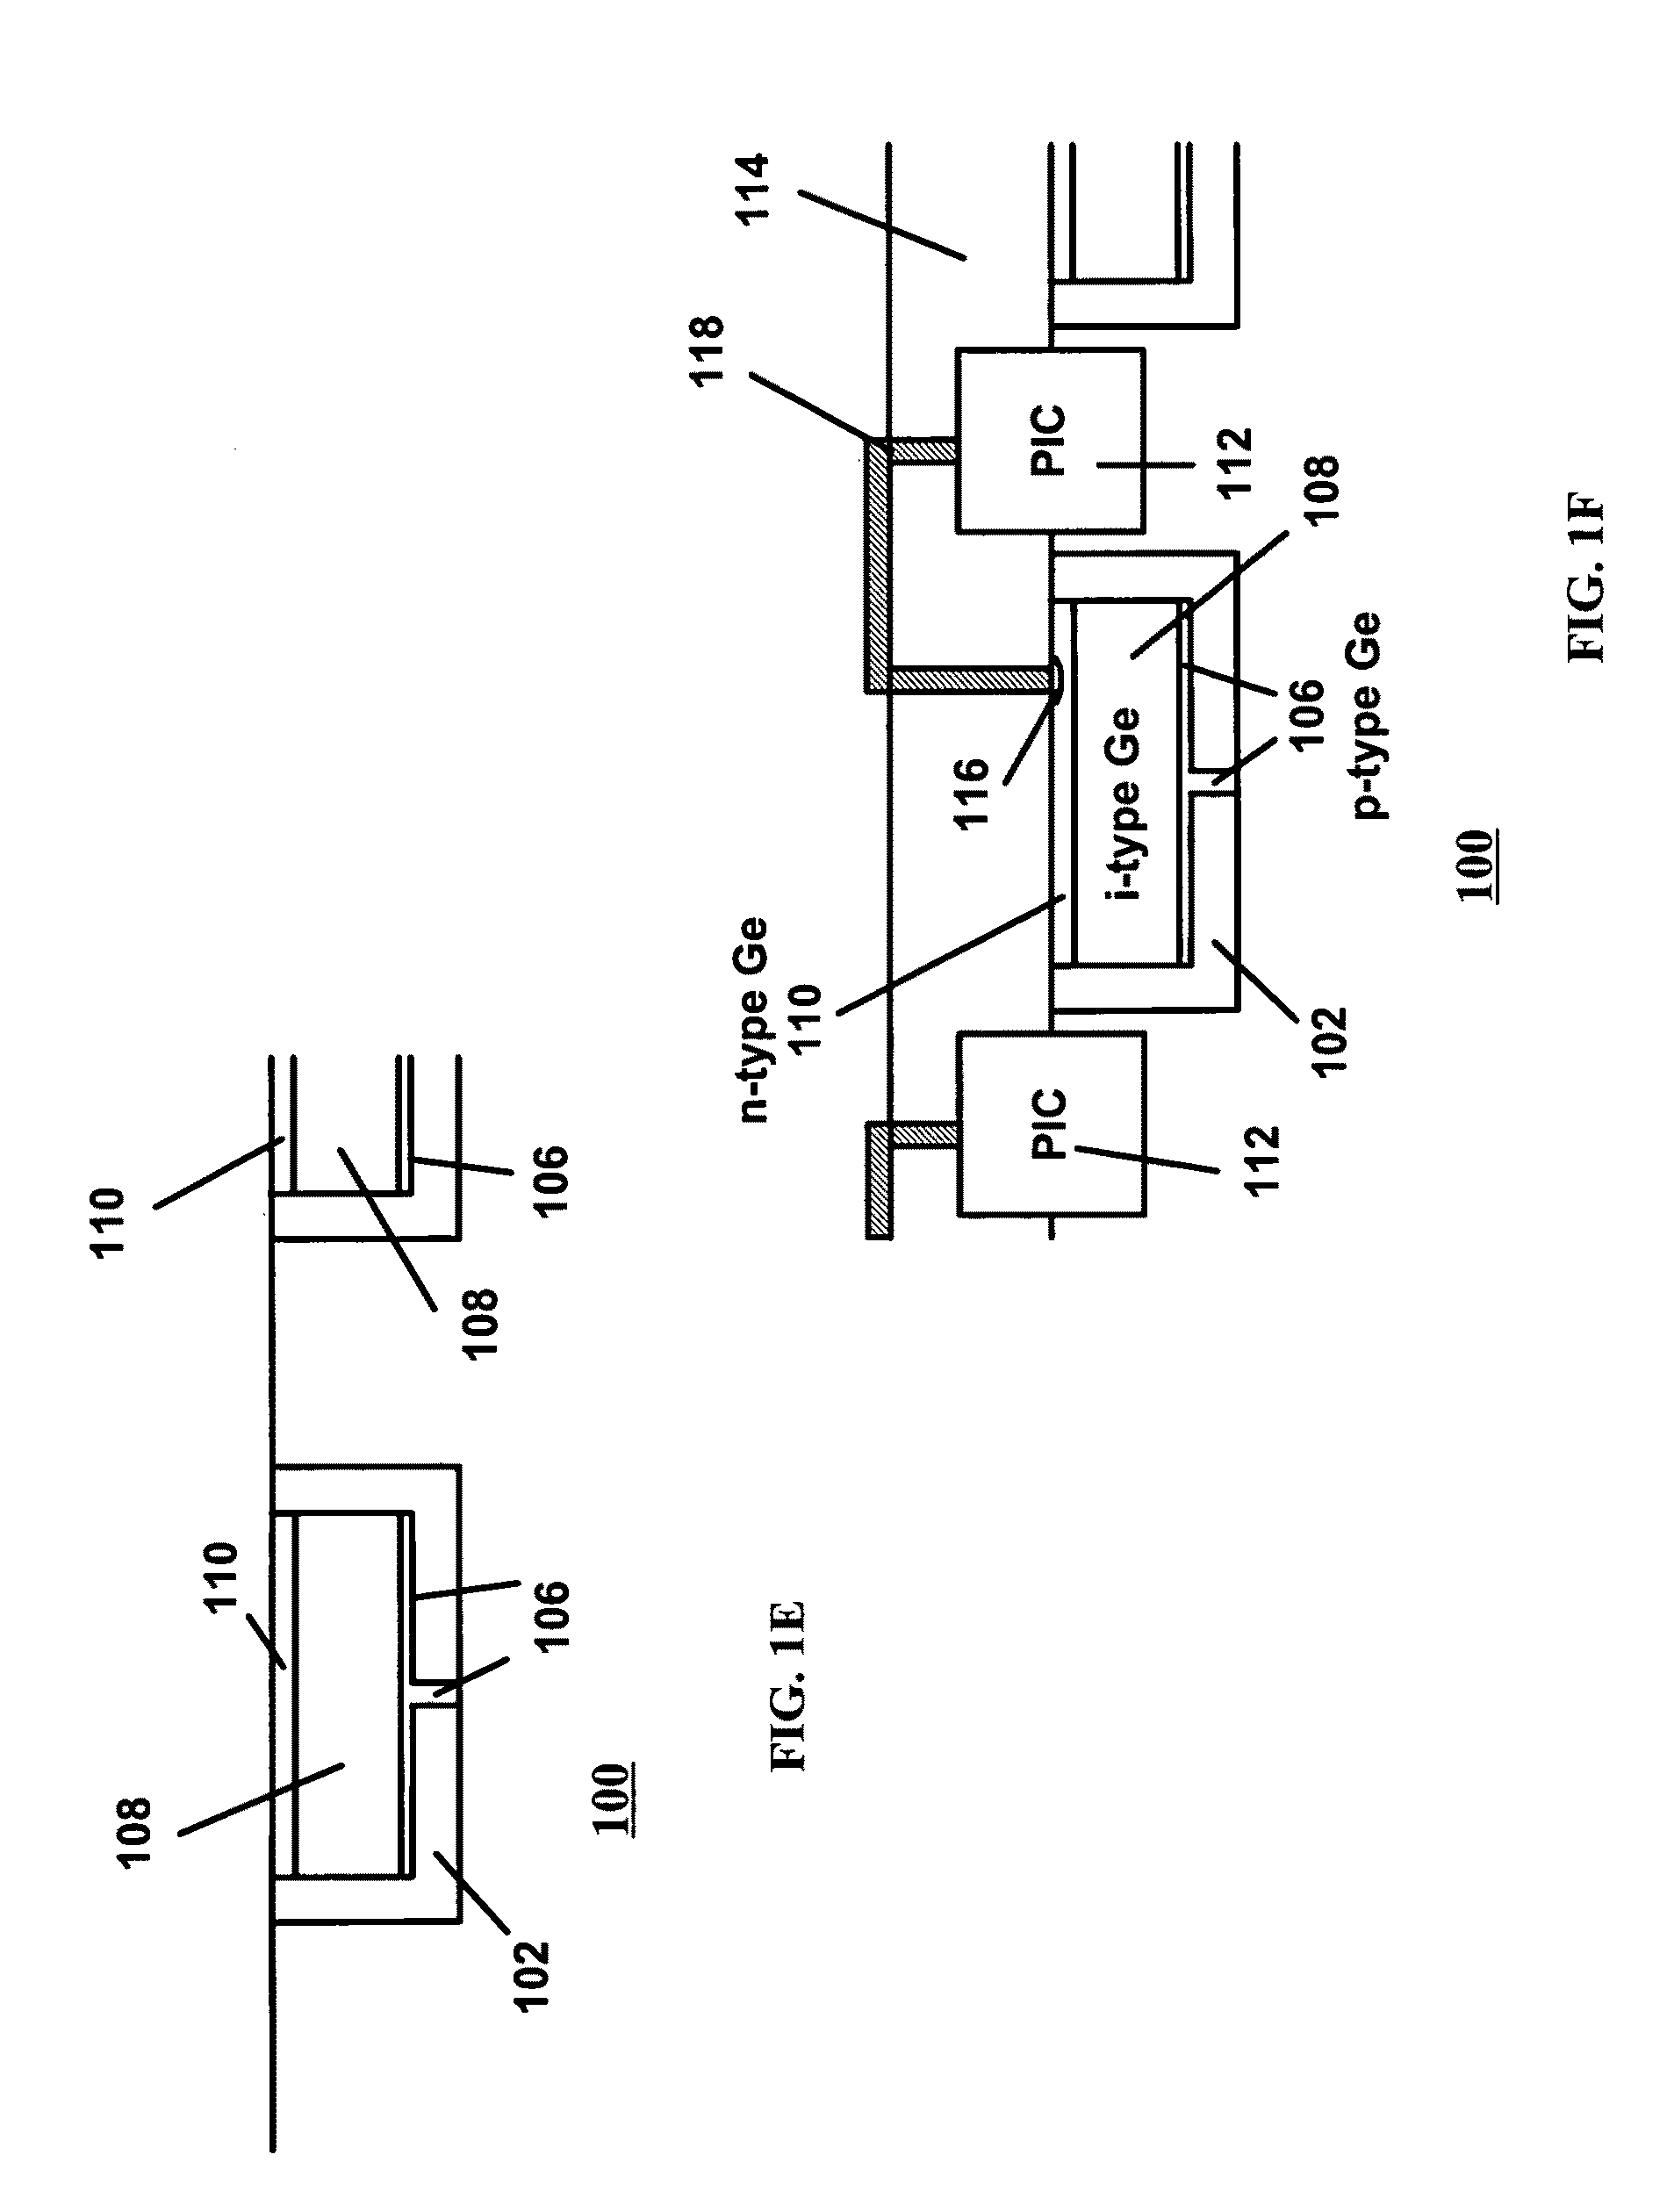 Hybrid imaging sensor with approximately equal potential photodiodes